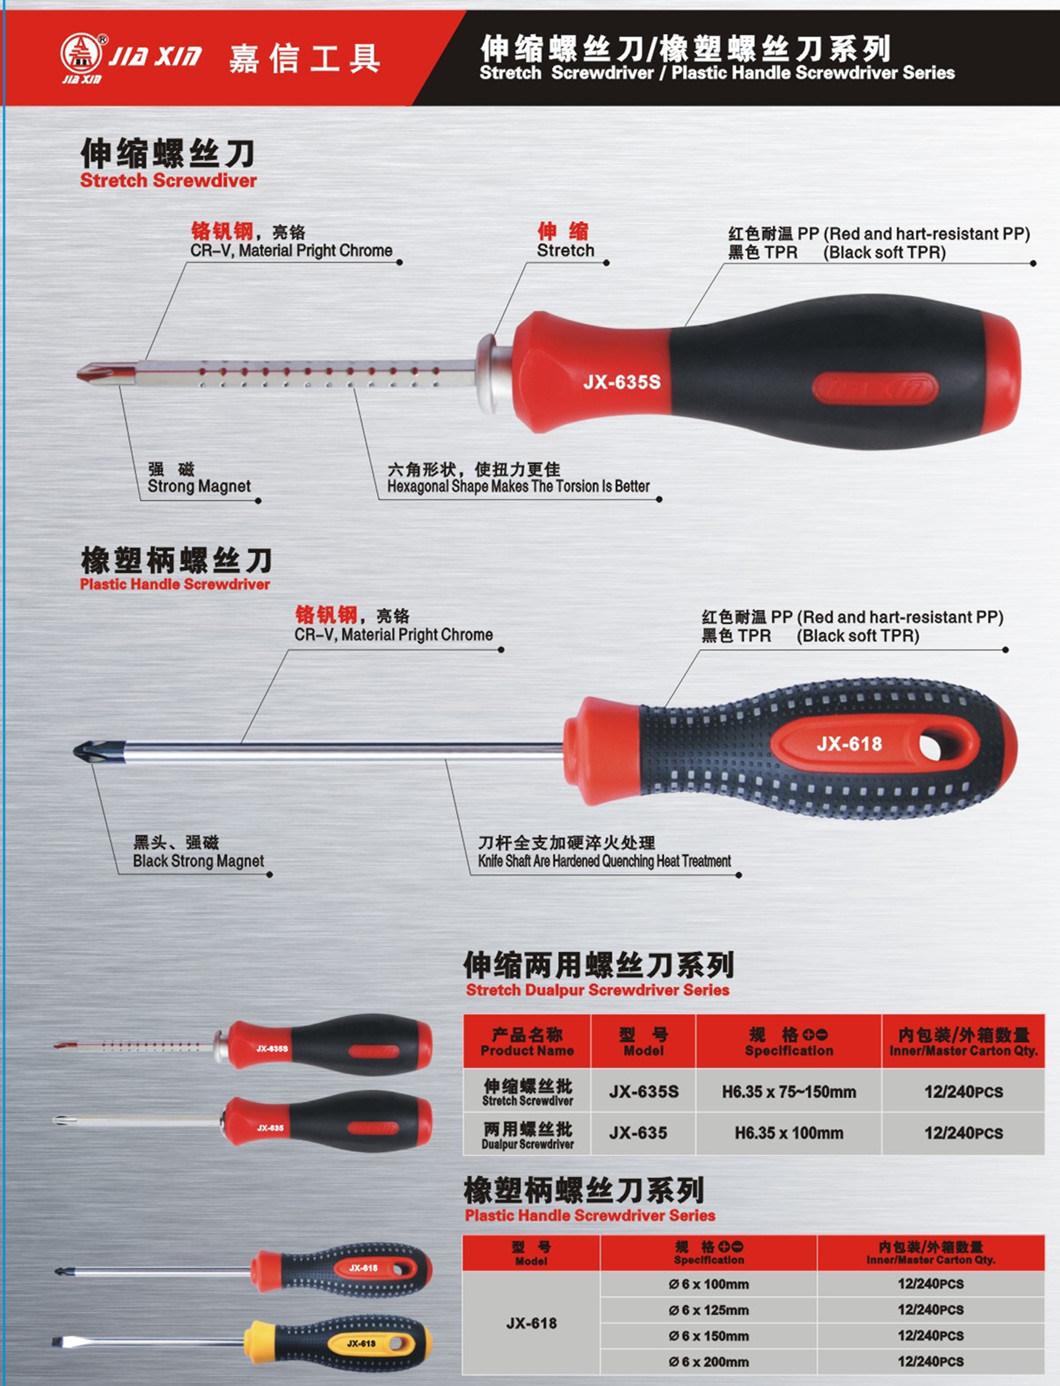 6.35mm 75-150mm Multifunction Screwdriver Magnetic Head Manual Slotted Screwdrivers